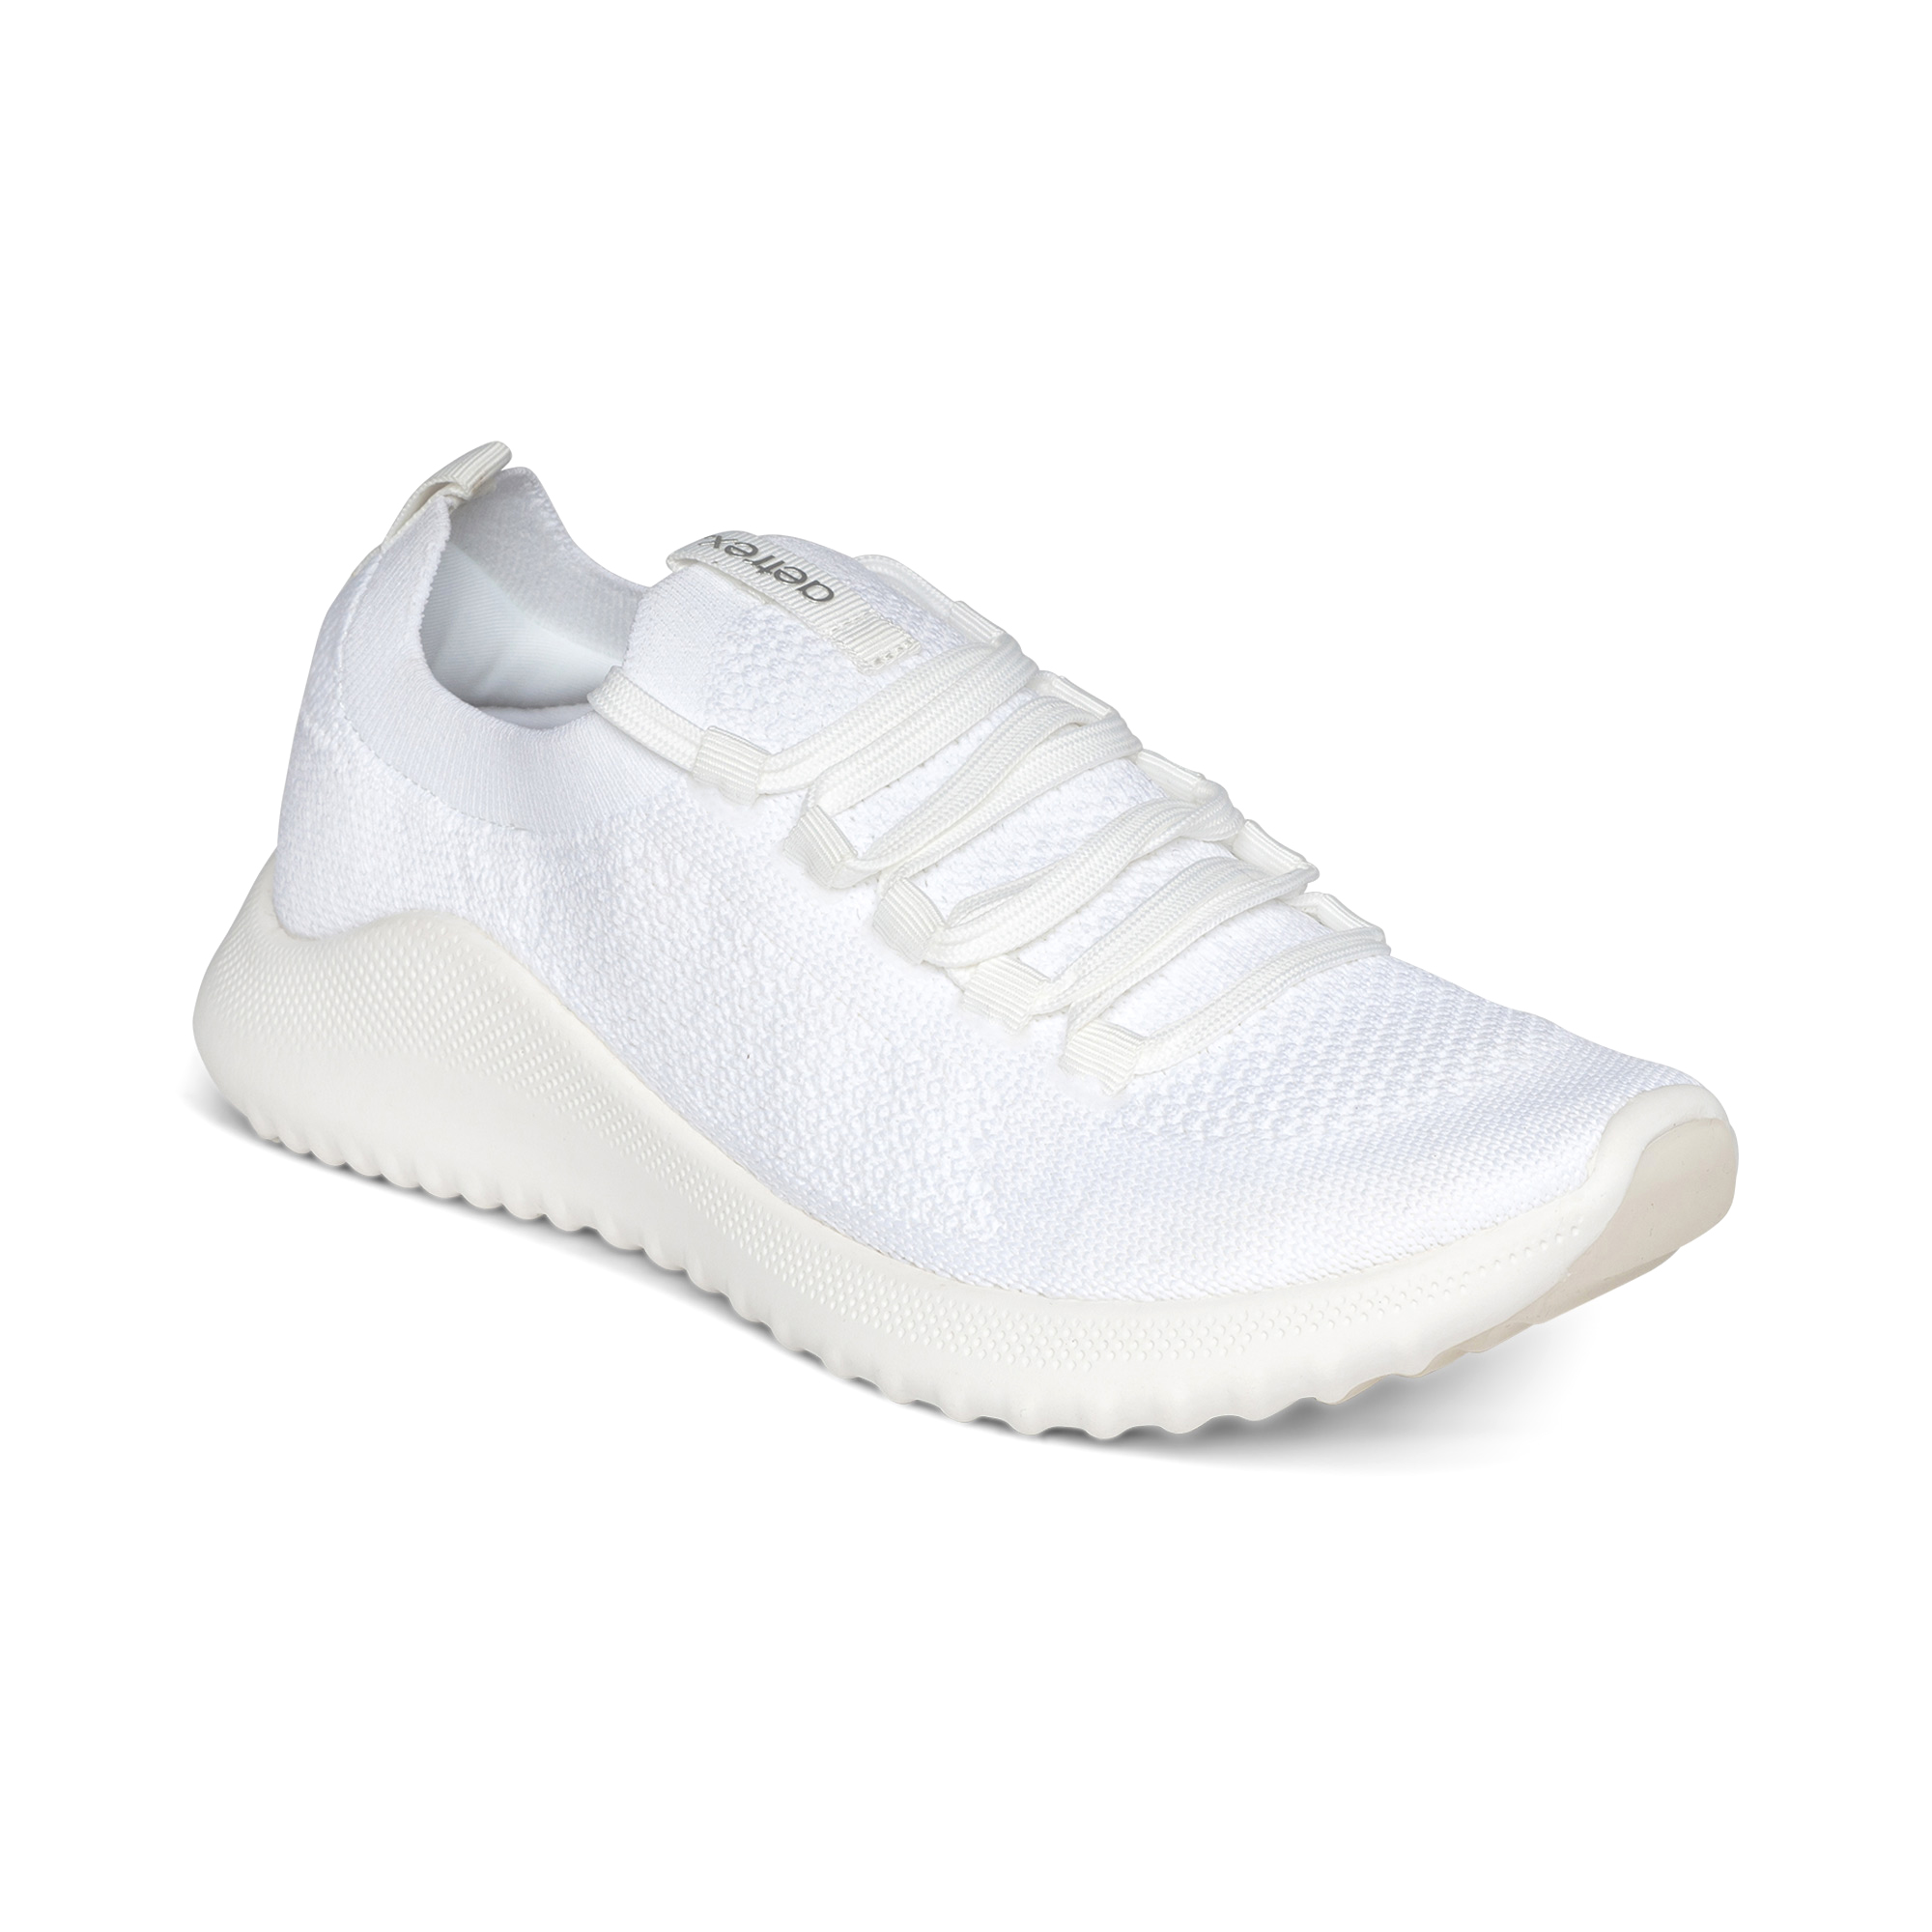 white tennis shoes with arch support